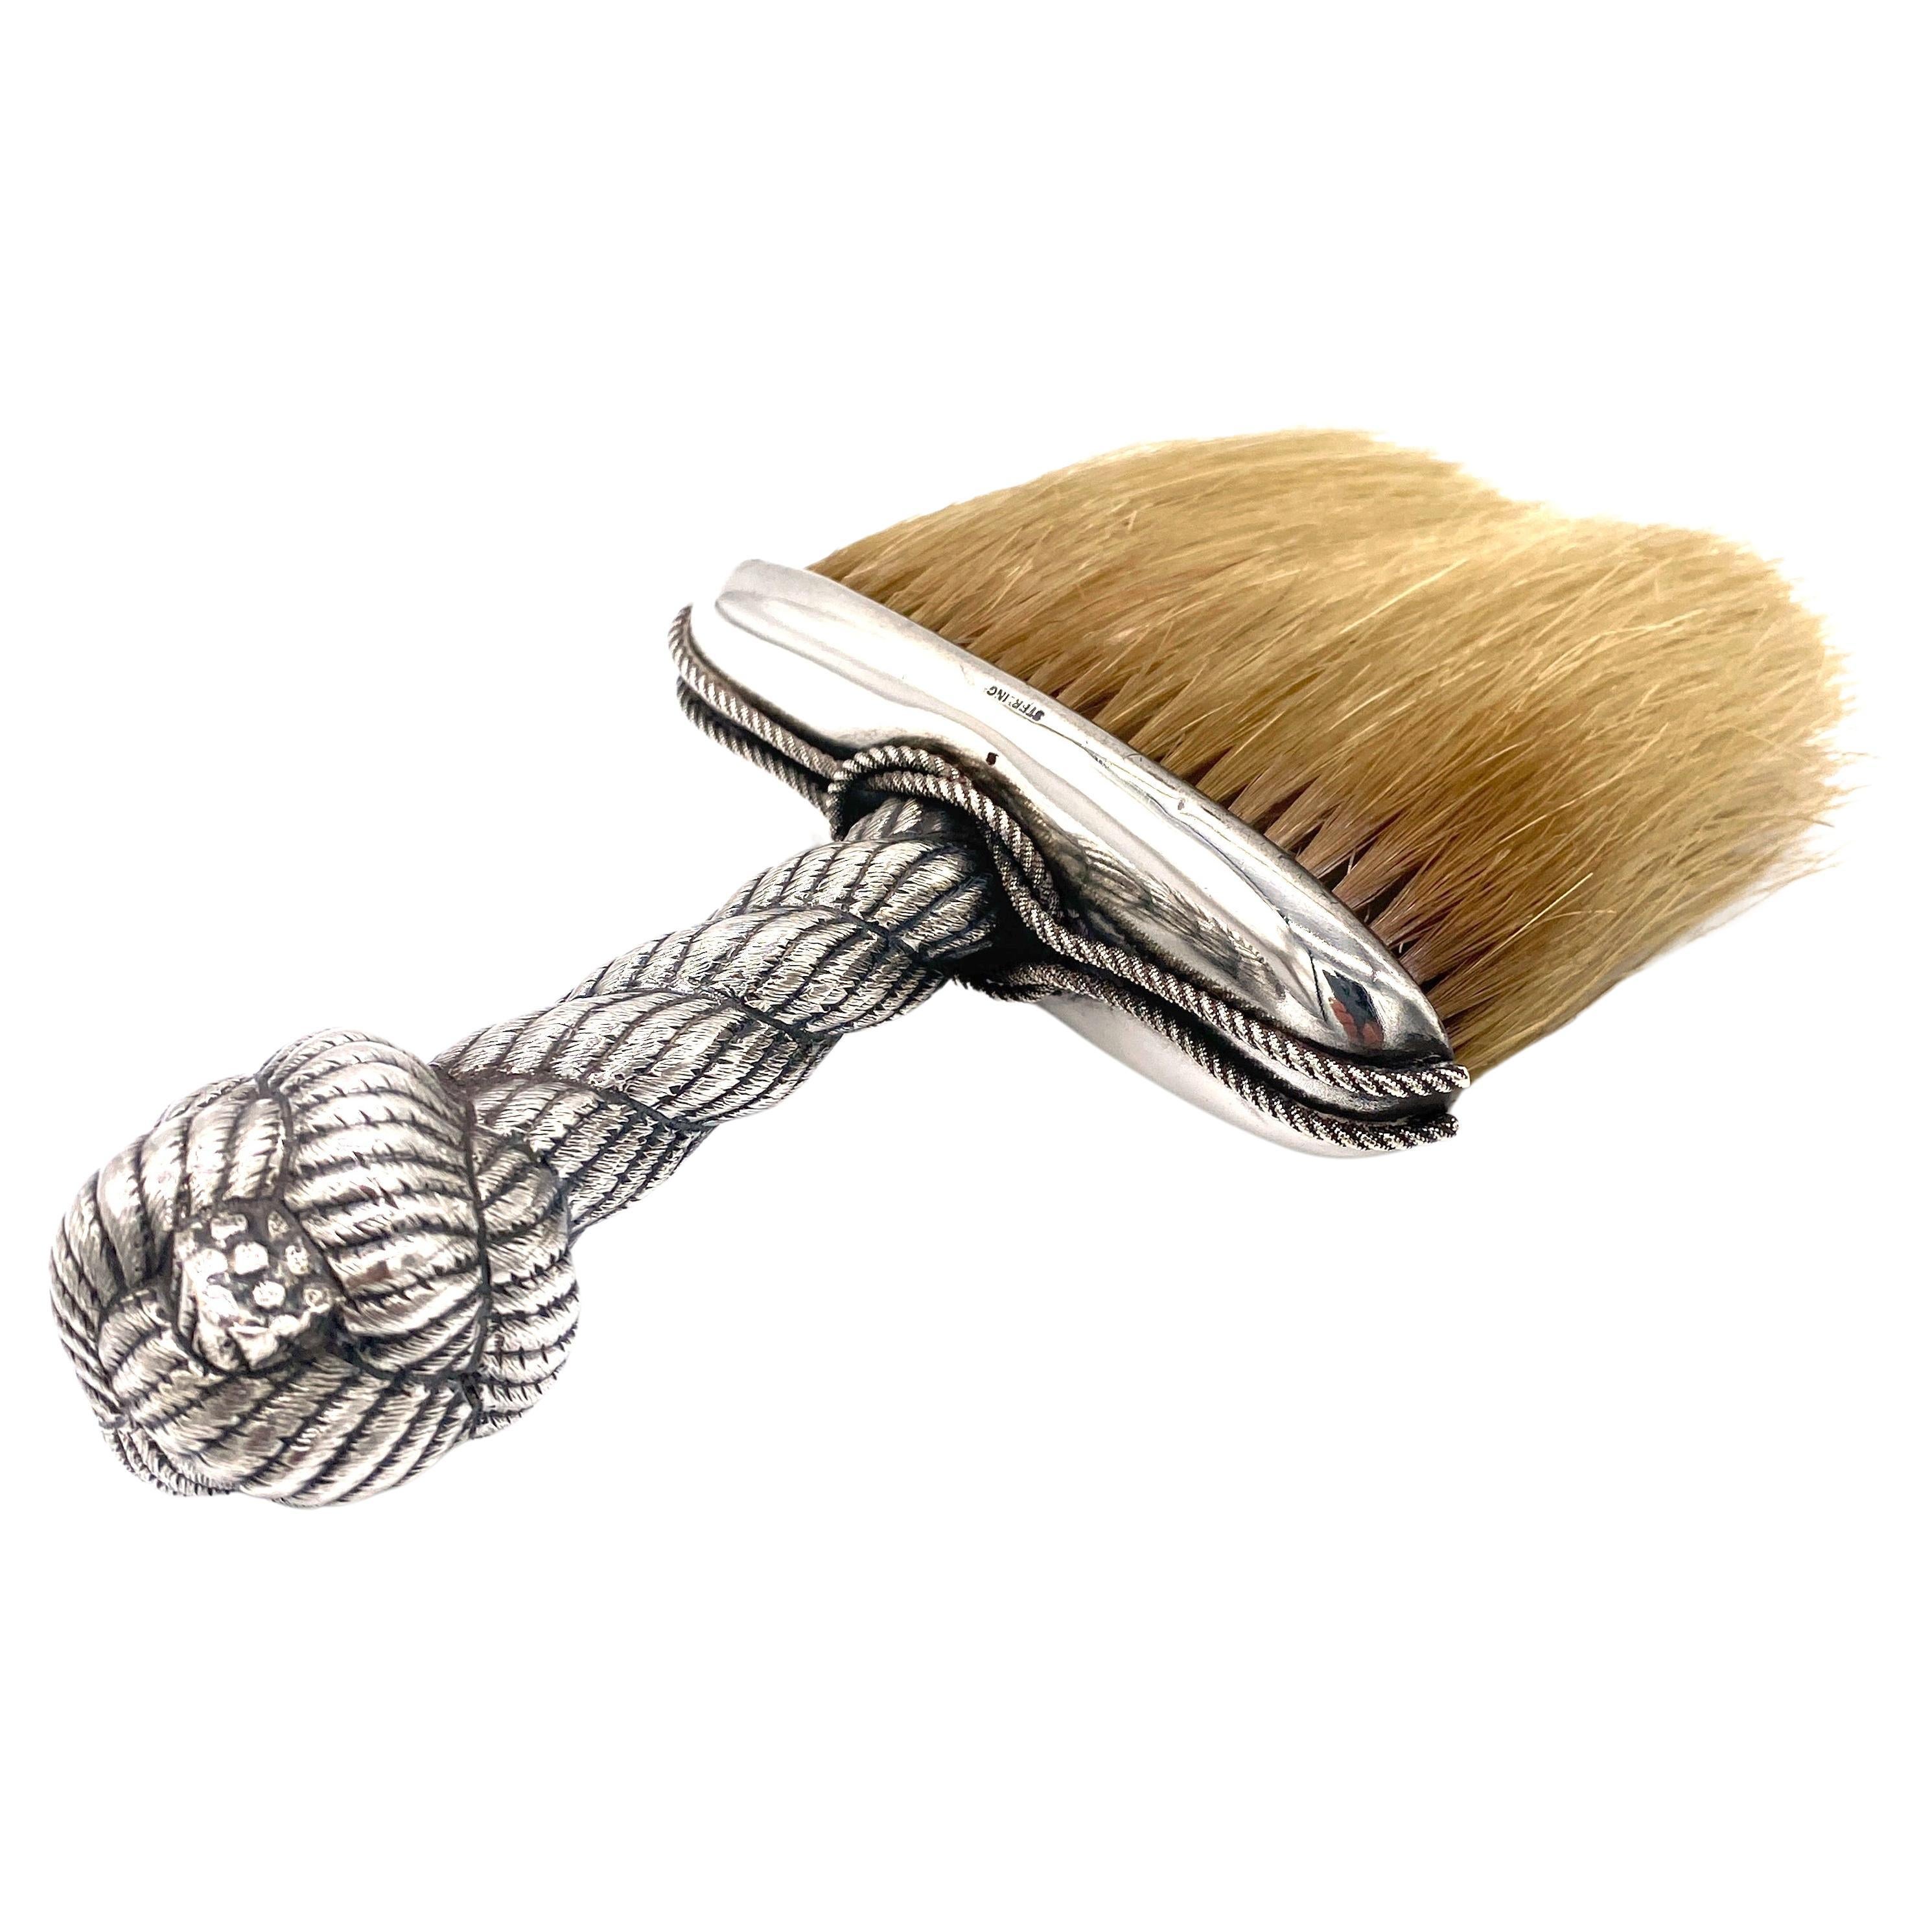 American Sterling Aesthetic 'Sailors Knot' Brush, Attributed Dominick & Haff
USA, CIRCA 1880S
Hallmarked 'STERLING', Attributed Dominick & Haff Silver Company. 

A remarkable American Sterling Aesthetic 'Sailors Knot' Brush, dating back to the 1880s